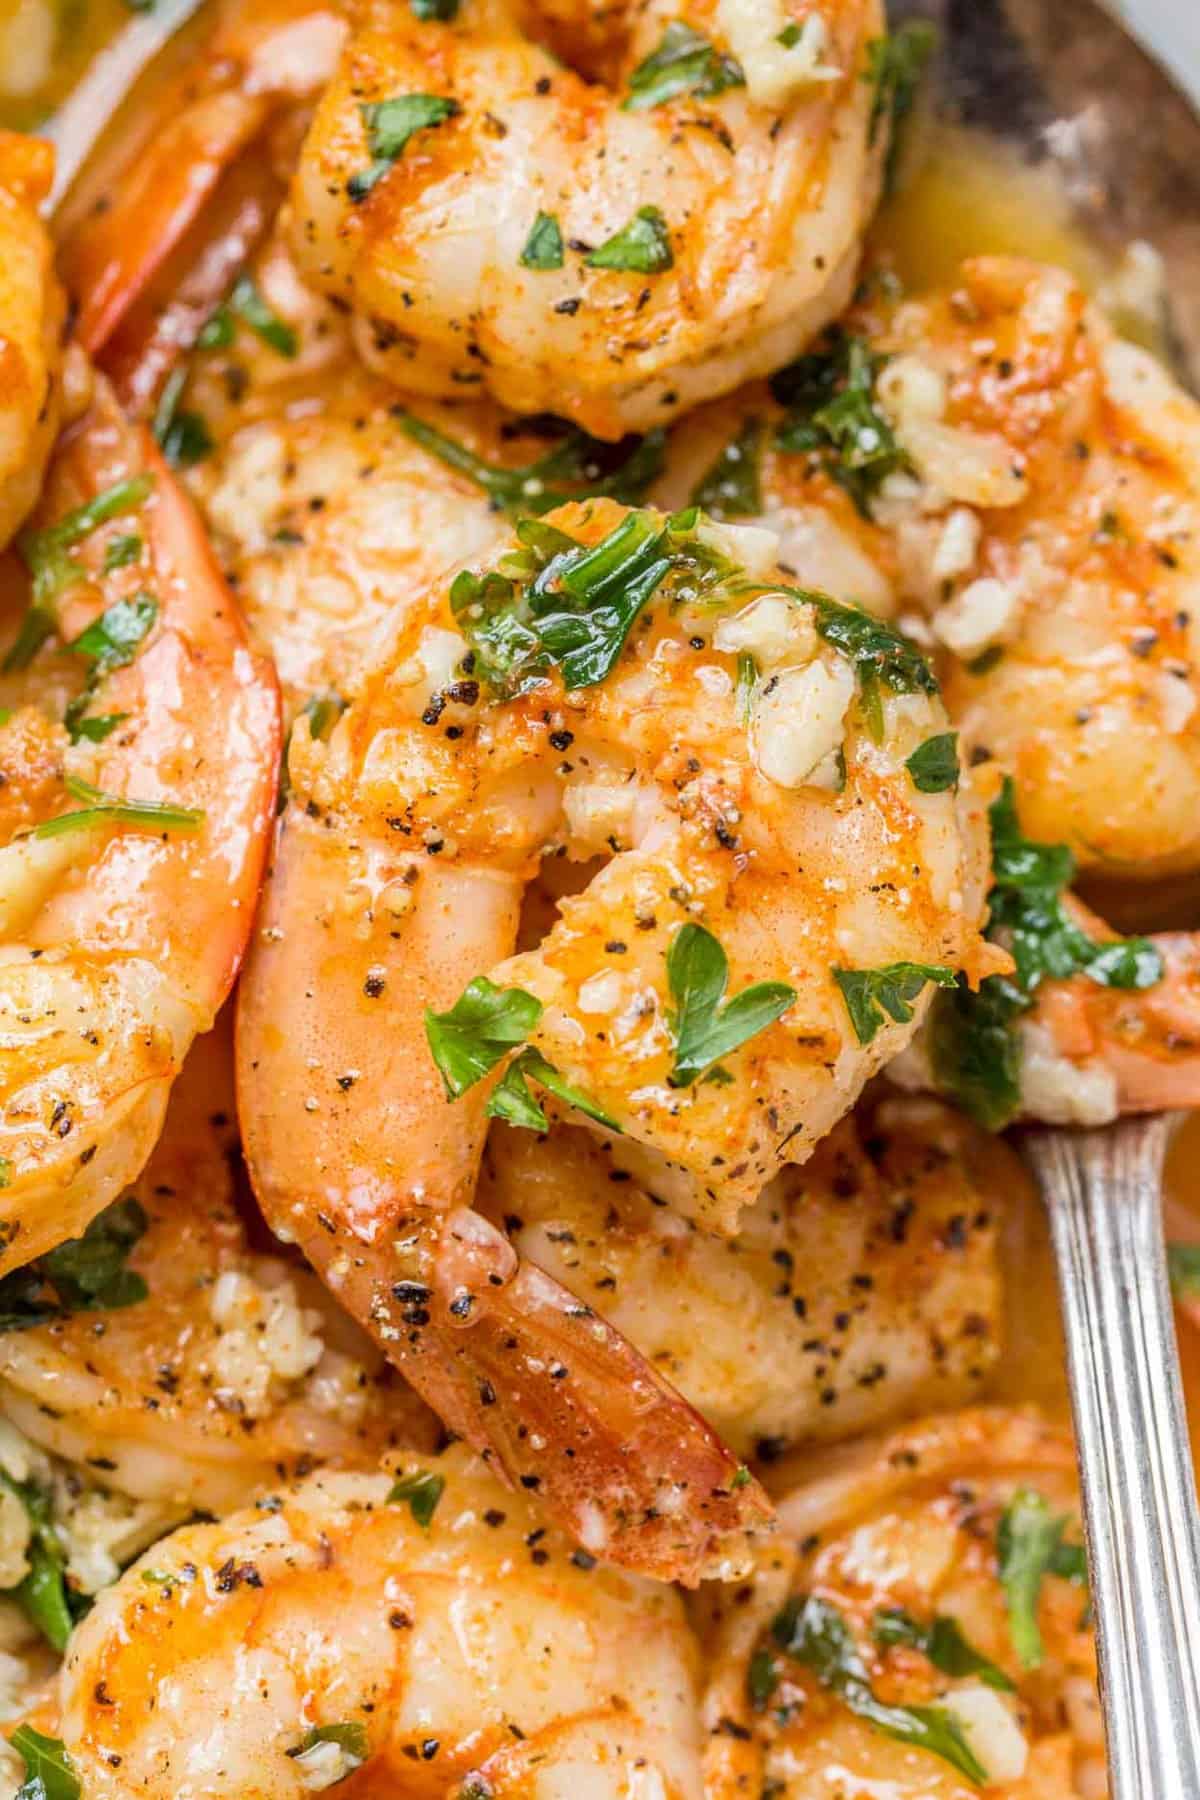 Shrimp scampi topped with black pepper and chopped parsley.